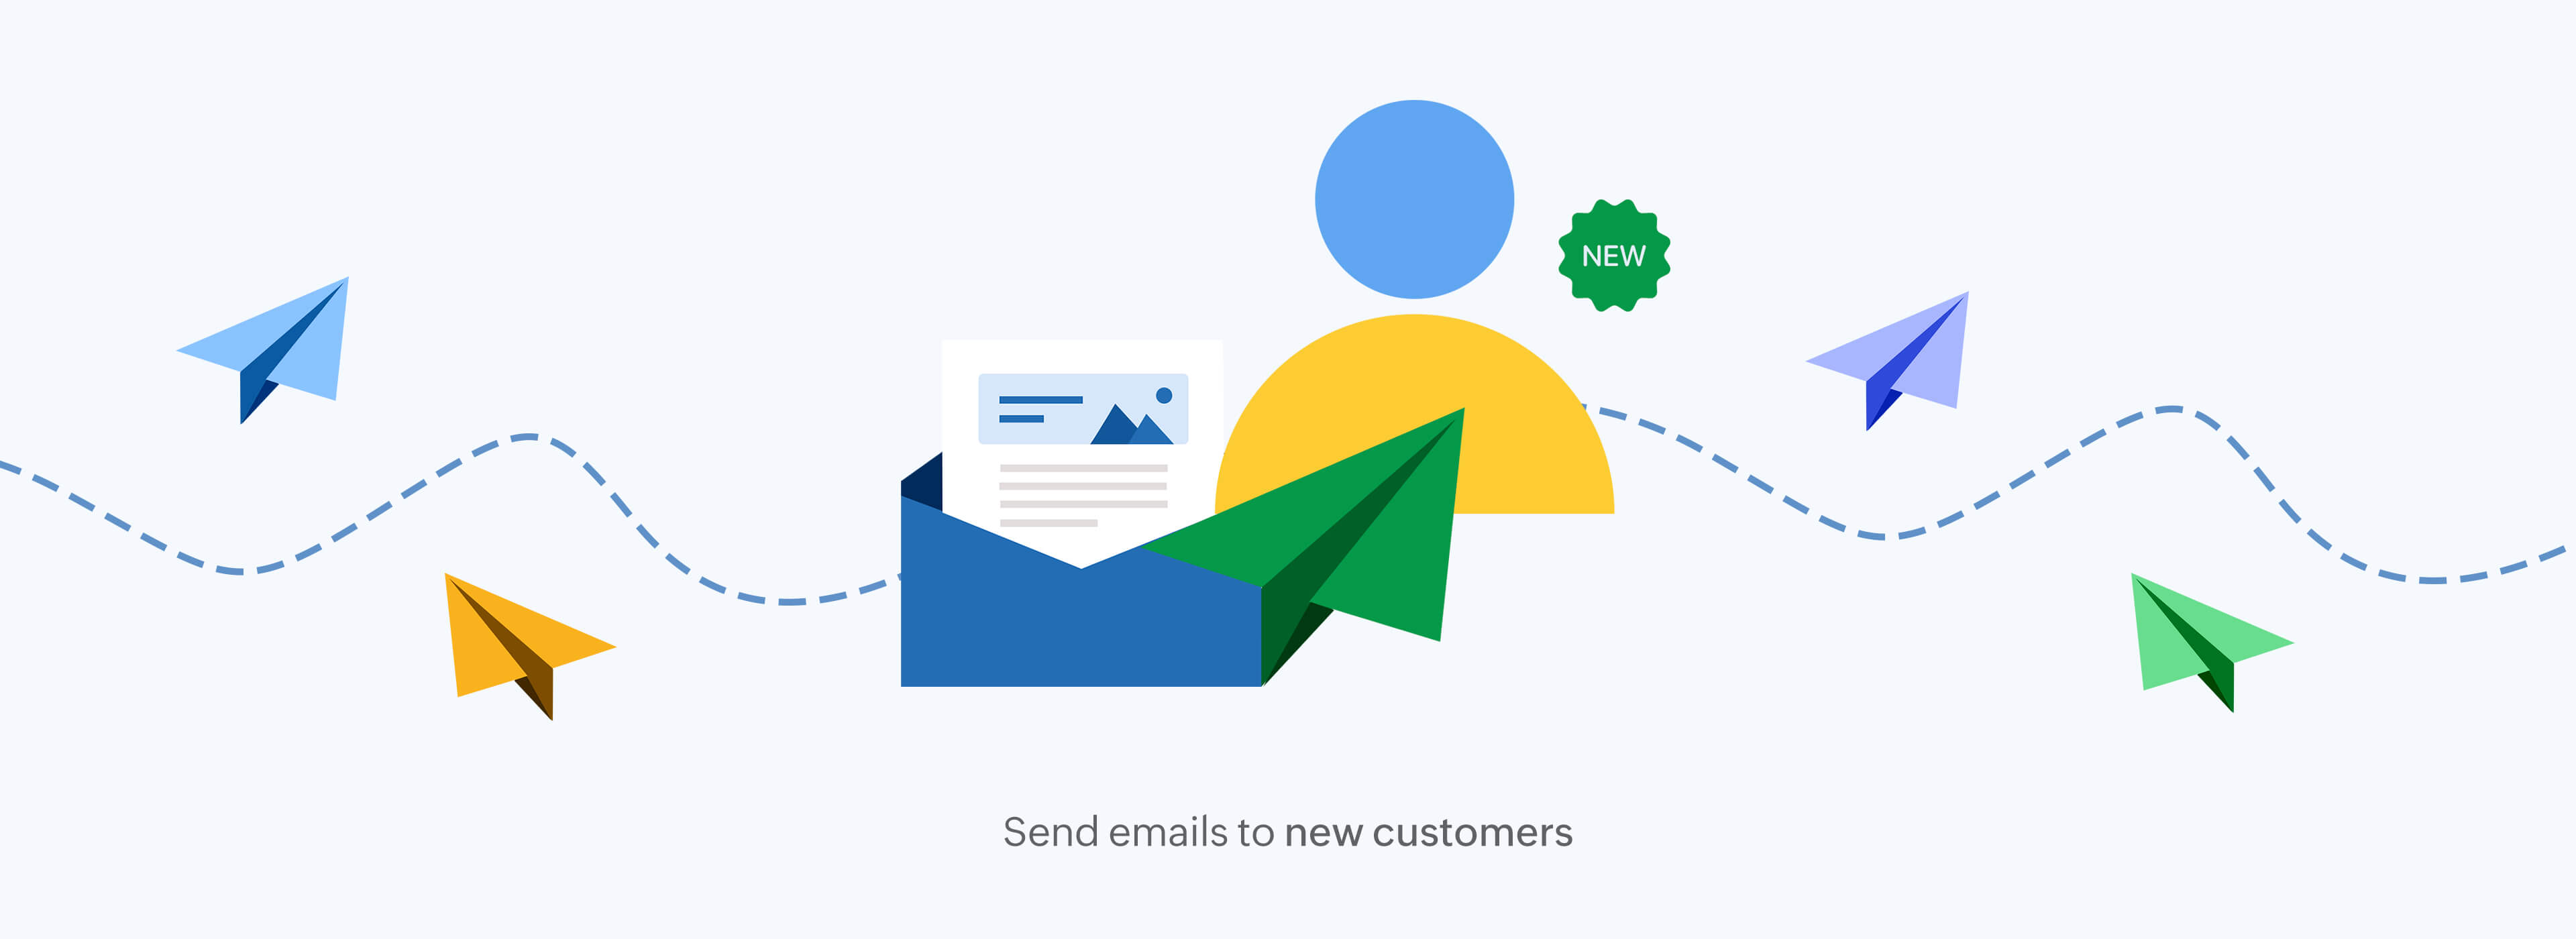 Send emails to new customers